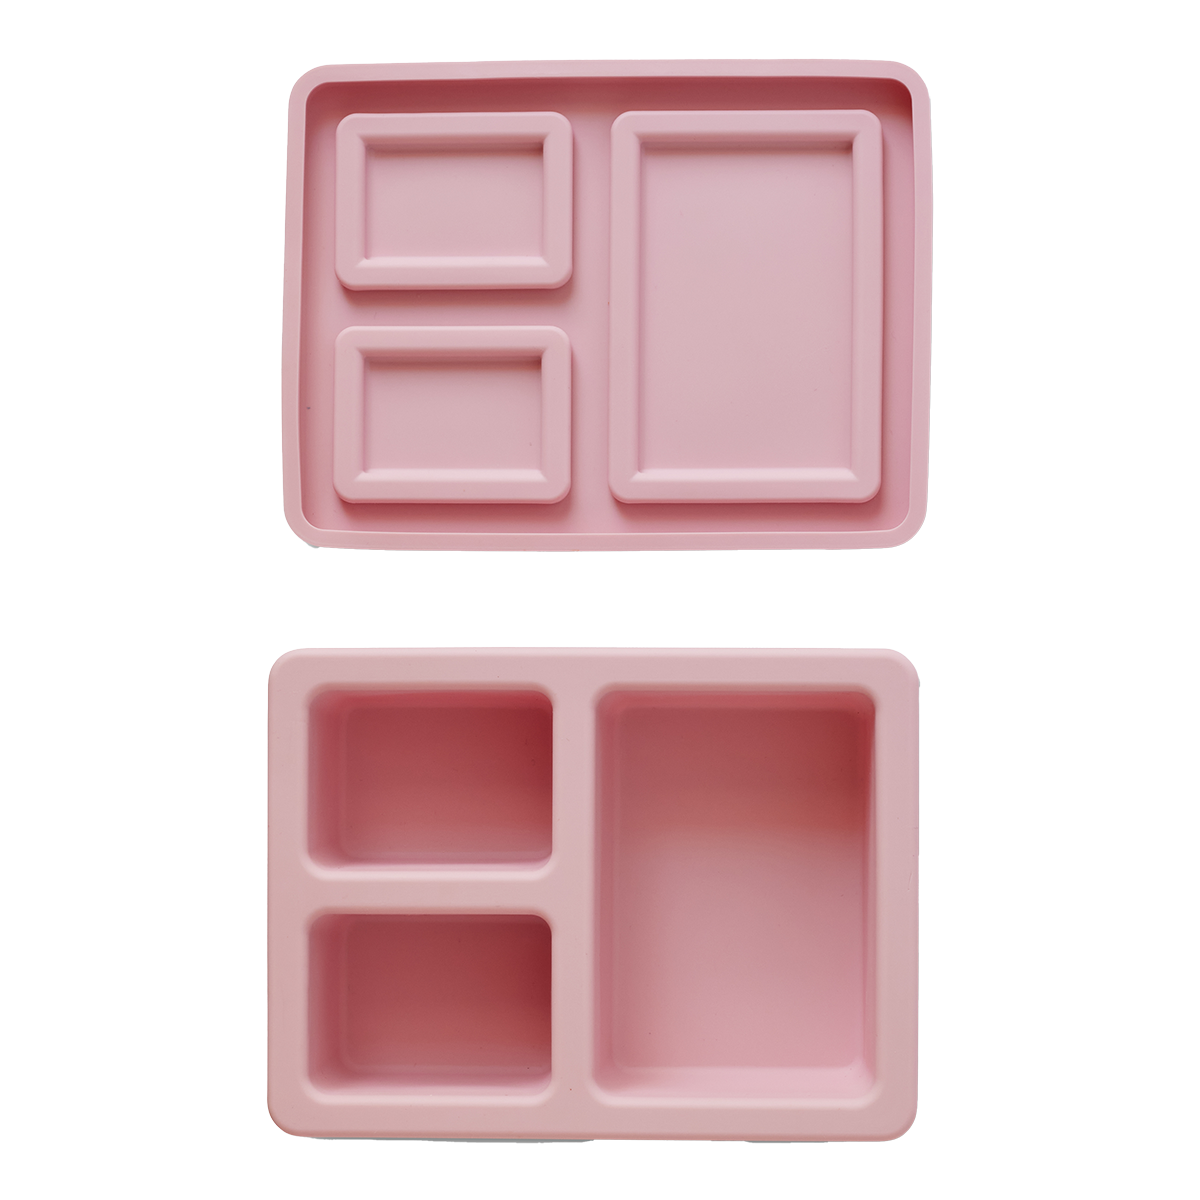 pink lunch bento box with three compartments inside